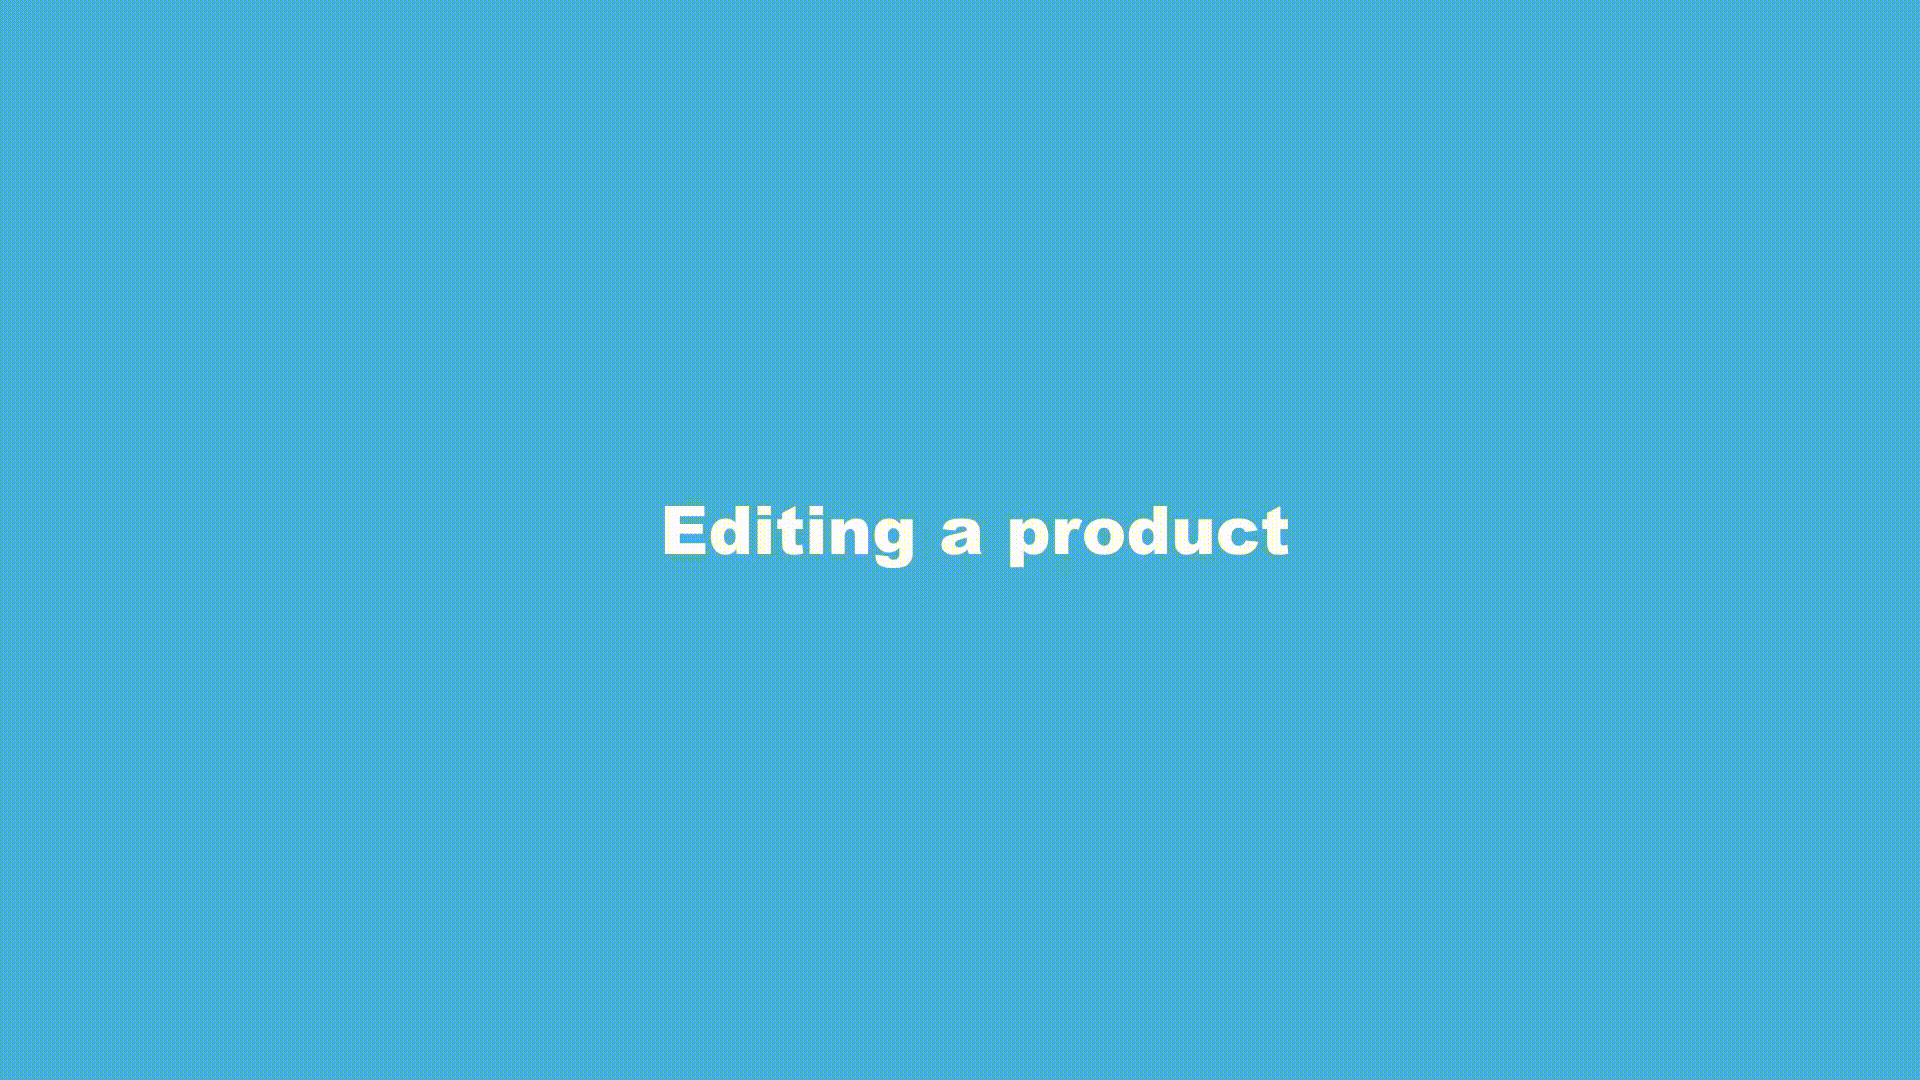 animation showing the steps to edit a product